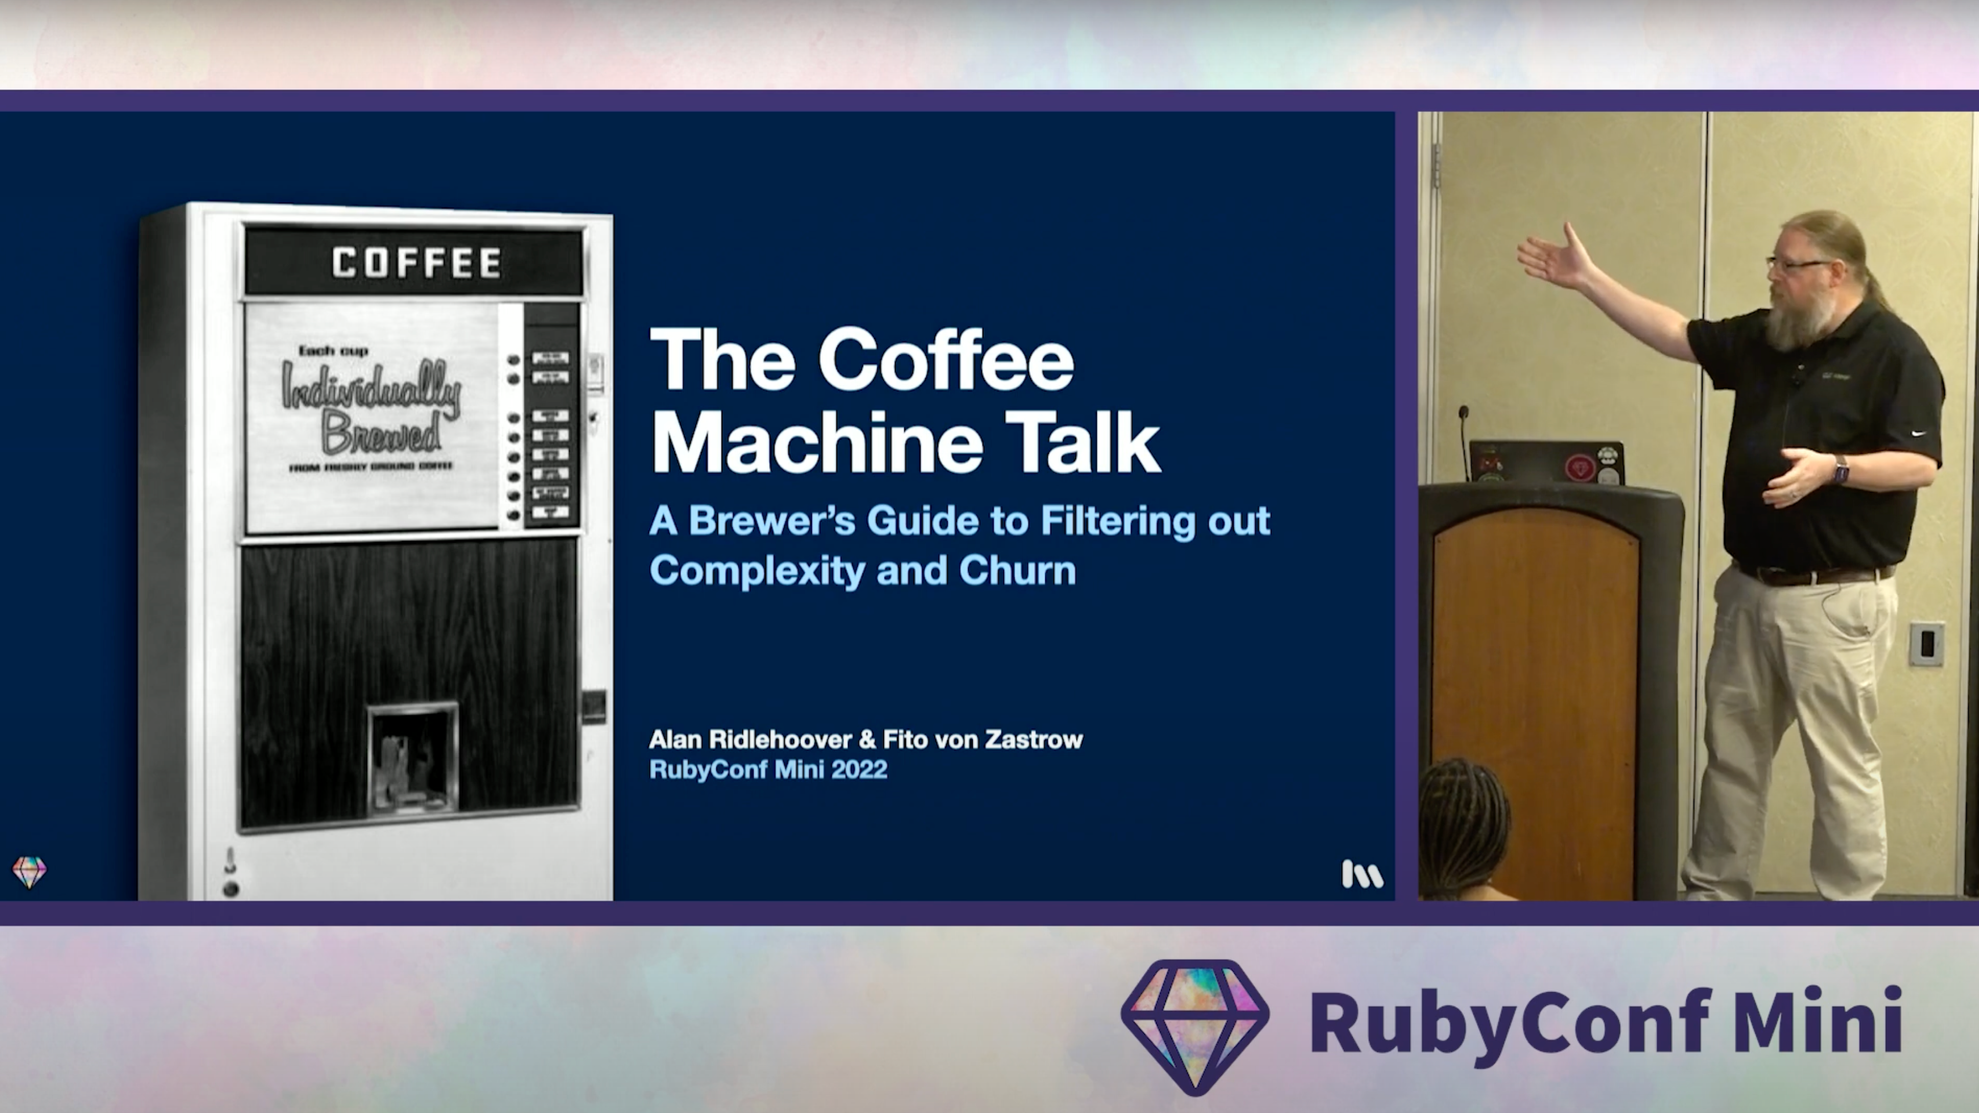 Alan Ridlehoover presenting (with Fito von Zastrow) at RubyConf Mini (in 2022), with a picture of a cartoon ruby on a large screen